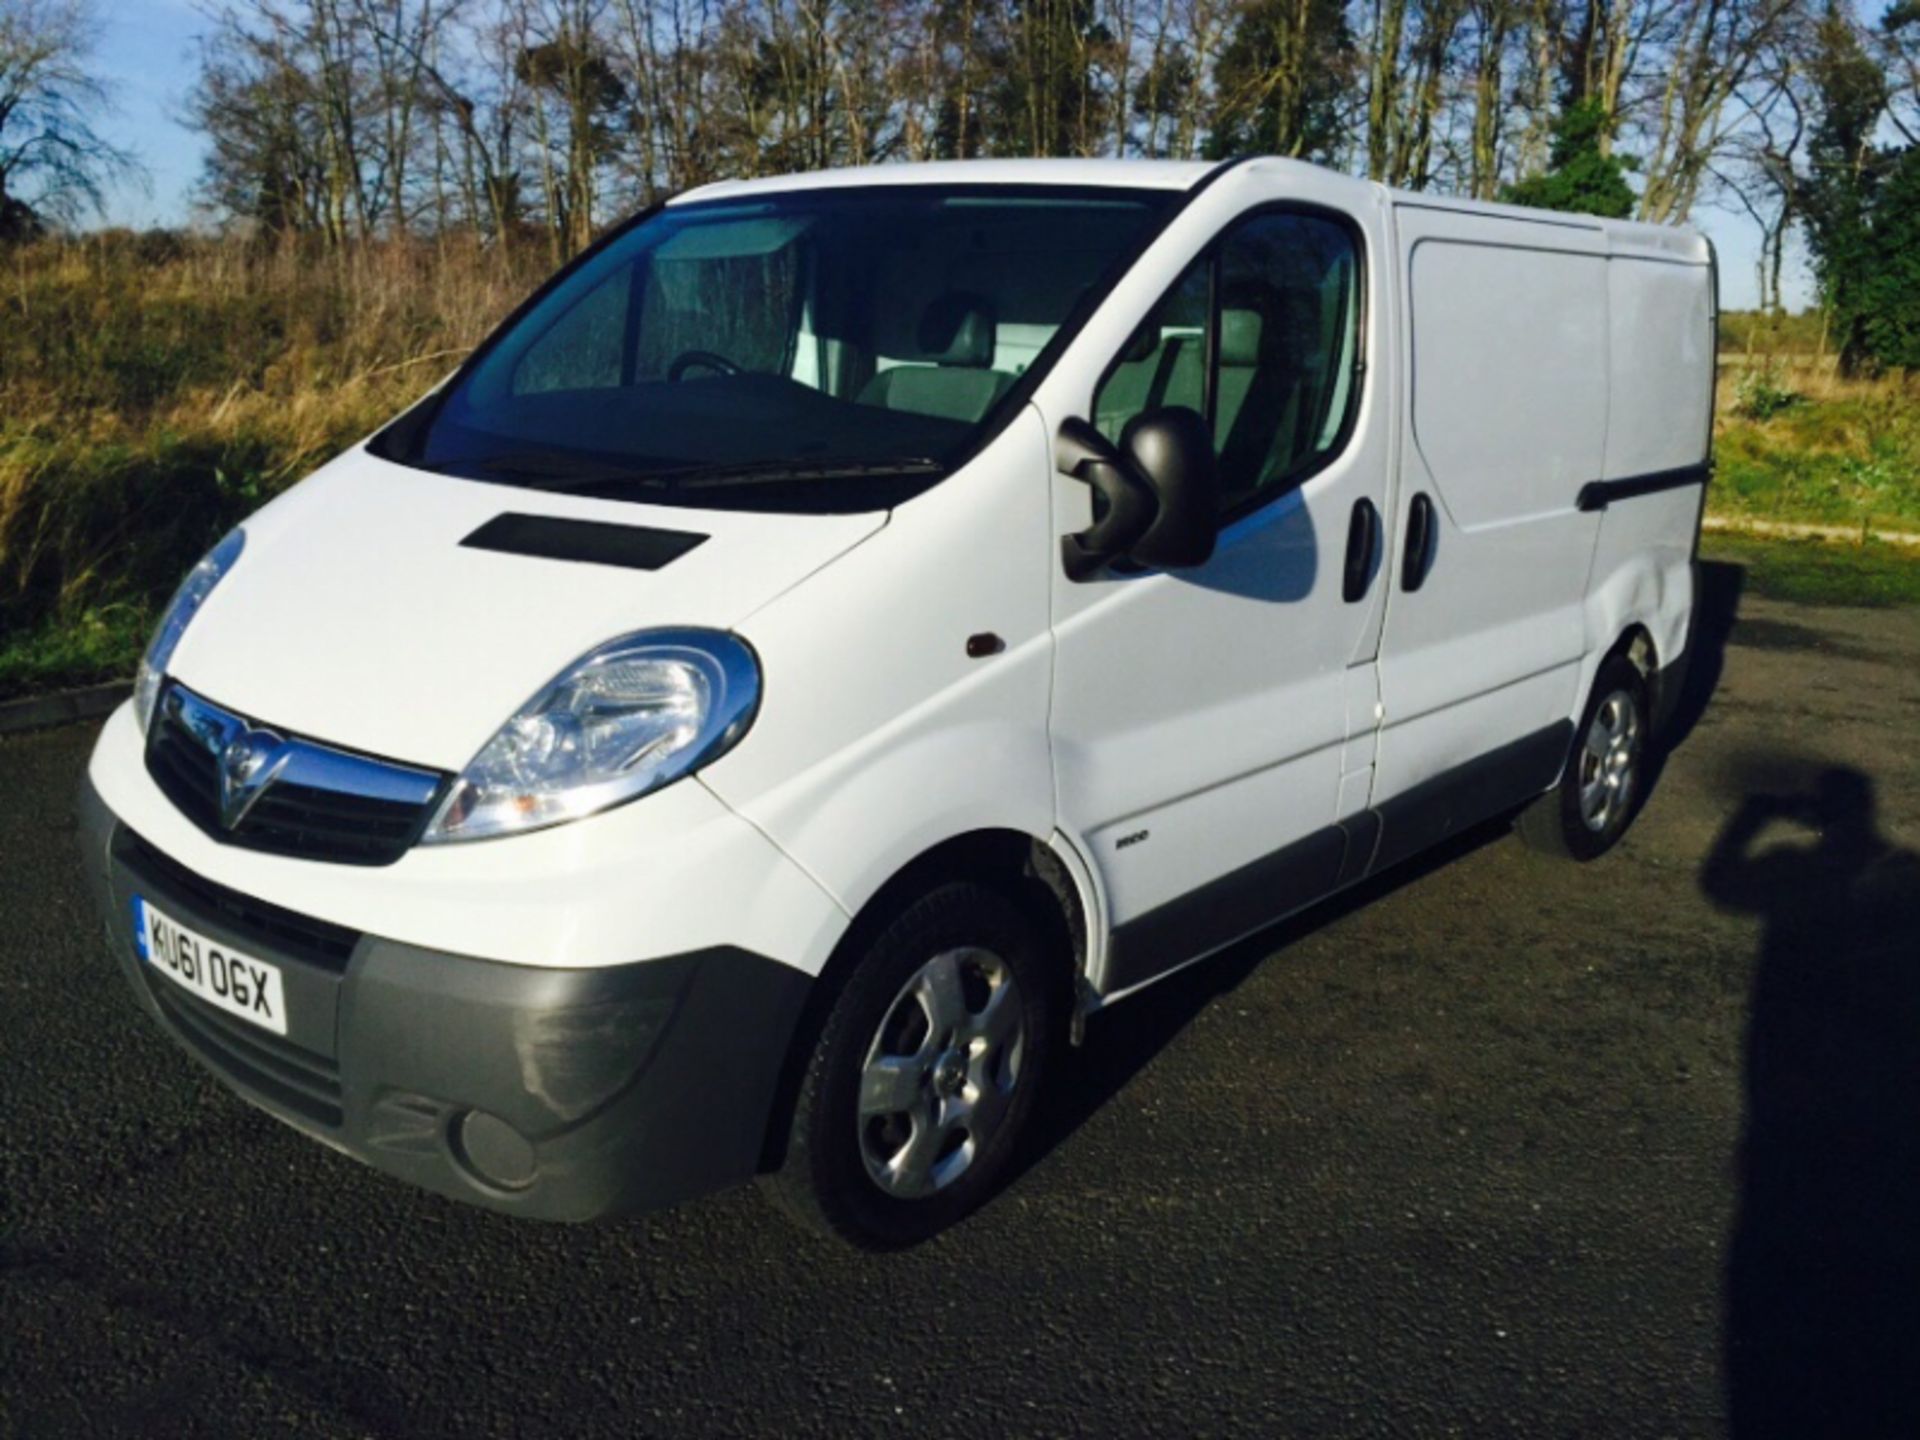 VAUXHALL VIVARO 2.0CDTI - 2012 MODEL - ELECTRIC PACK - 1 OWNER FROM NEW - FULL SERVICE HISTORY!!!! - Image 2 of 9